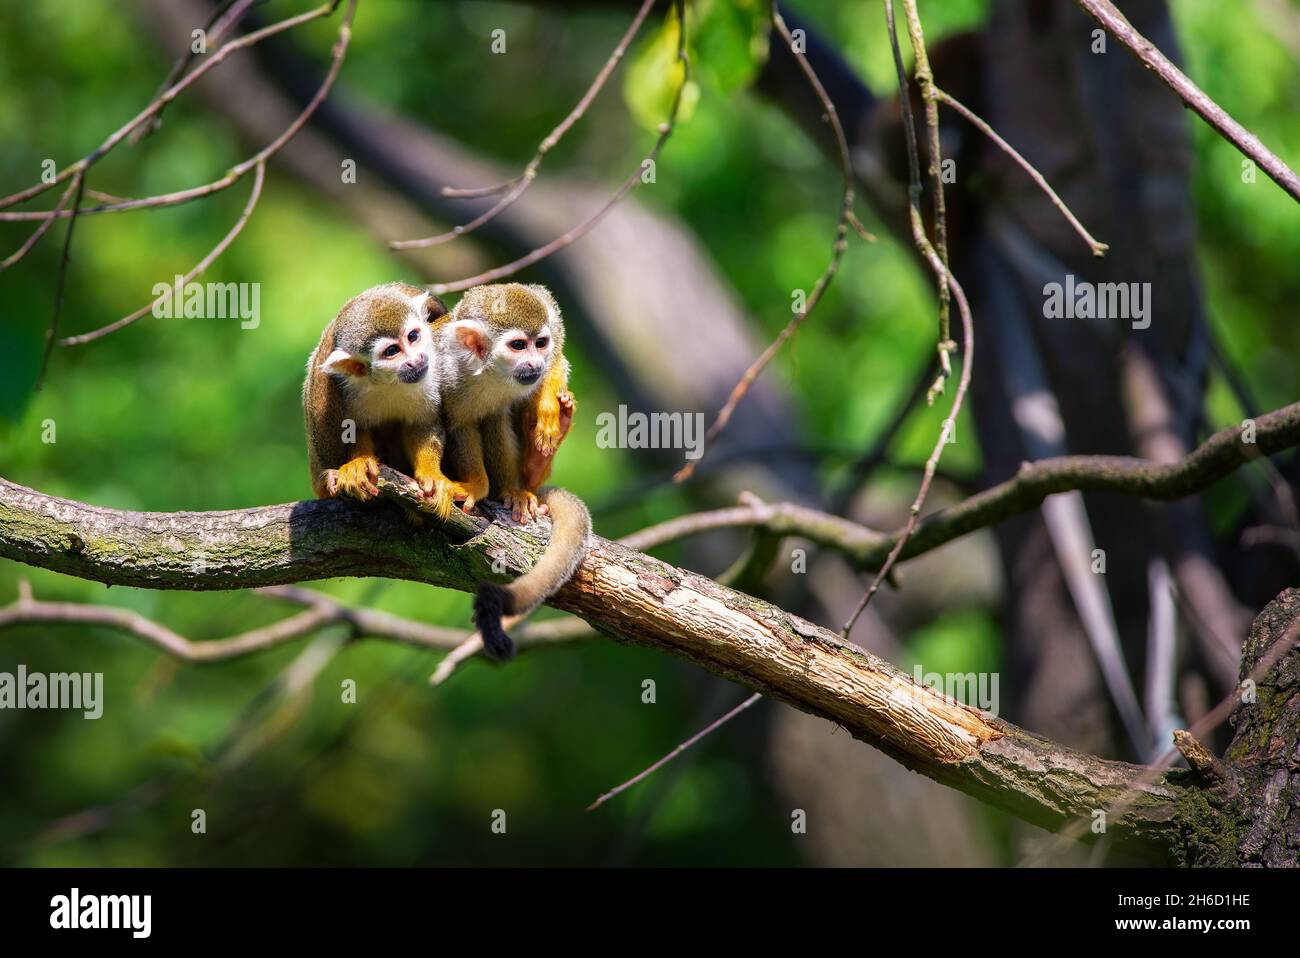 Two common squirrel monkeys sitting on a tree branch Stock Photo